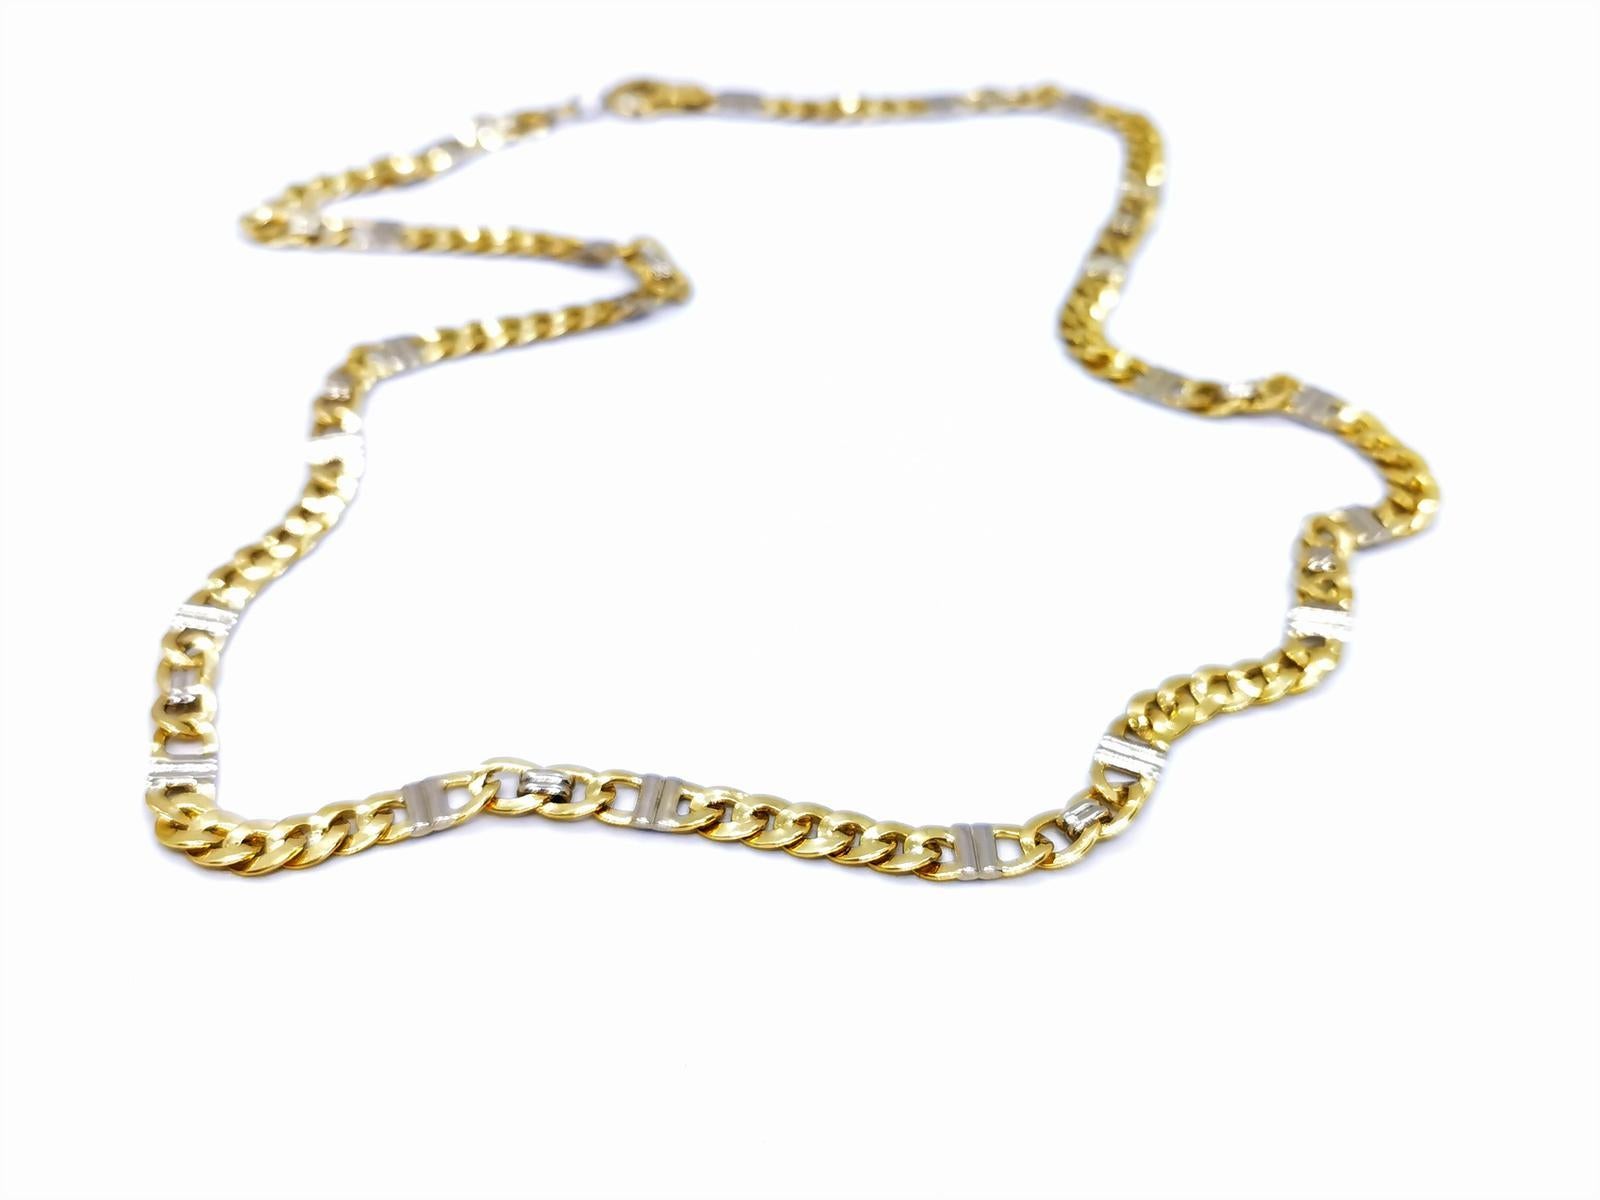 Necklace yellow and white gold 750 mils (18 carats). articulated link chain. length: 60 cm. width: 0.6 cm. total weight: 43.22 g. punched. excellent condition
